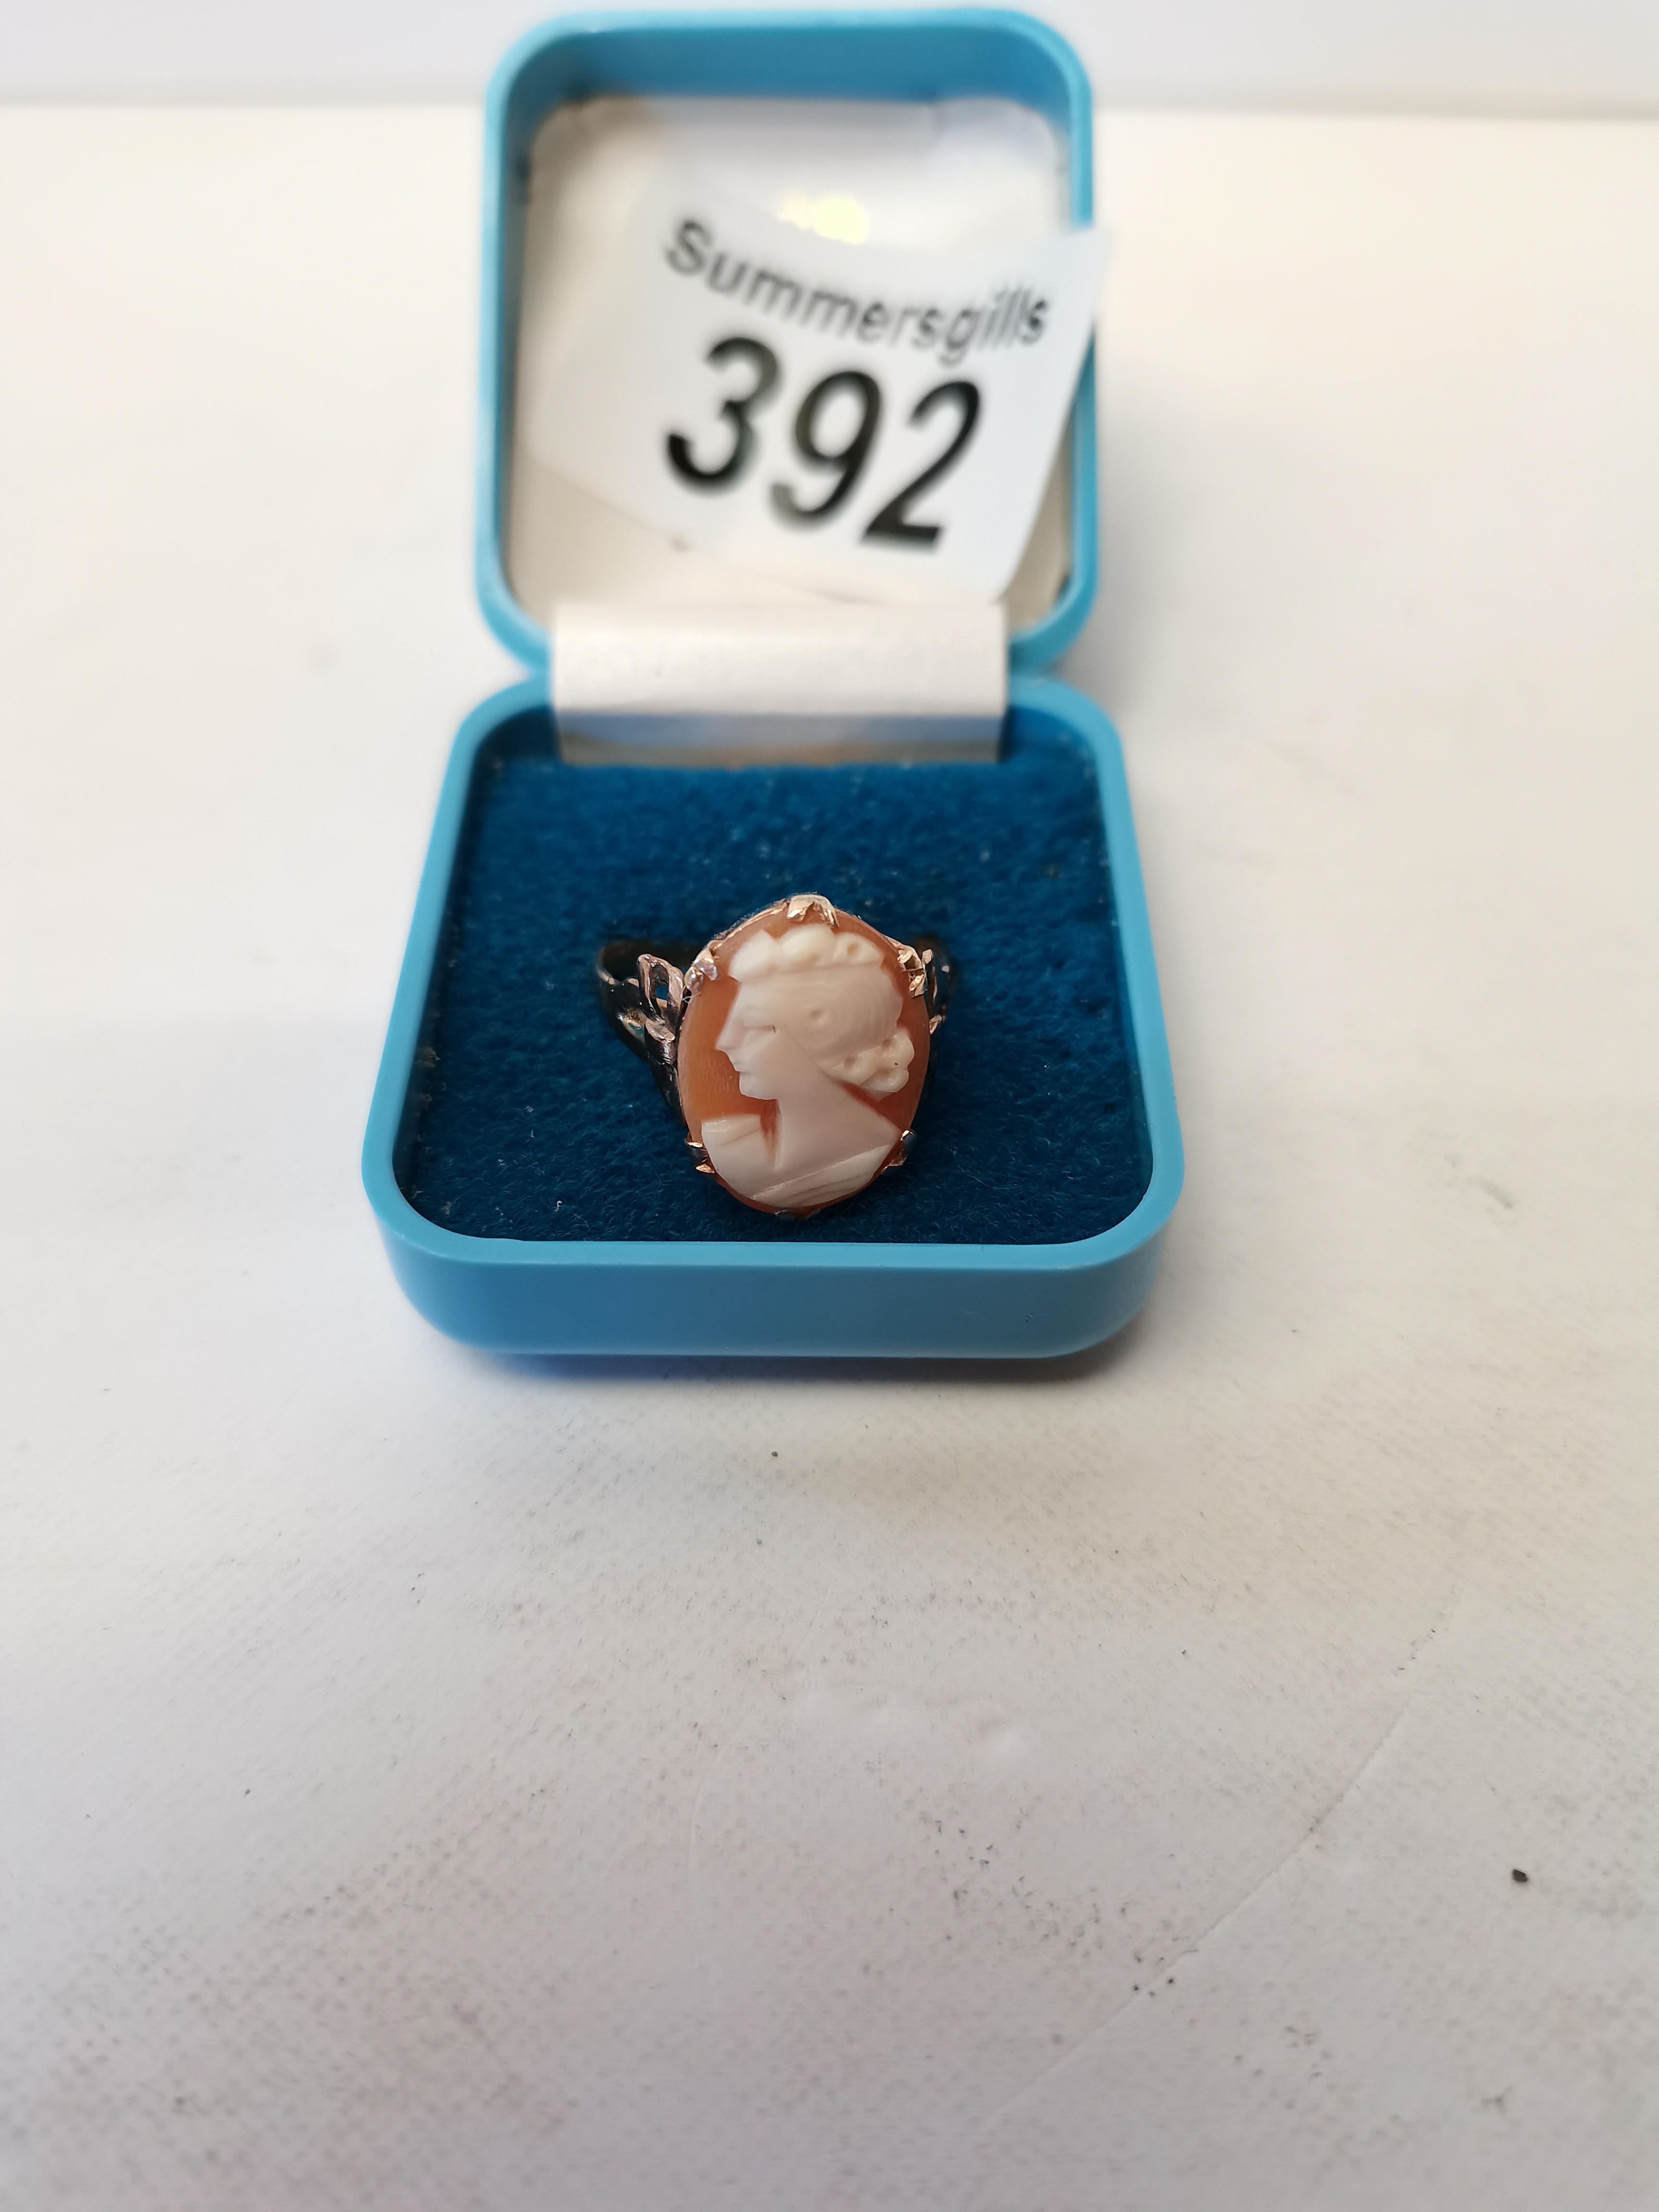 Cameo ring 9ct 3g size approx N